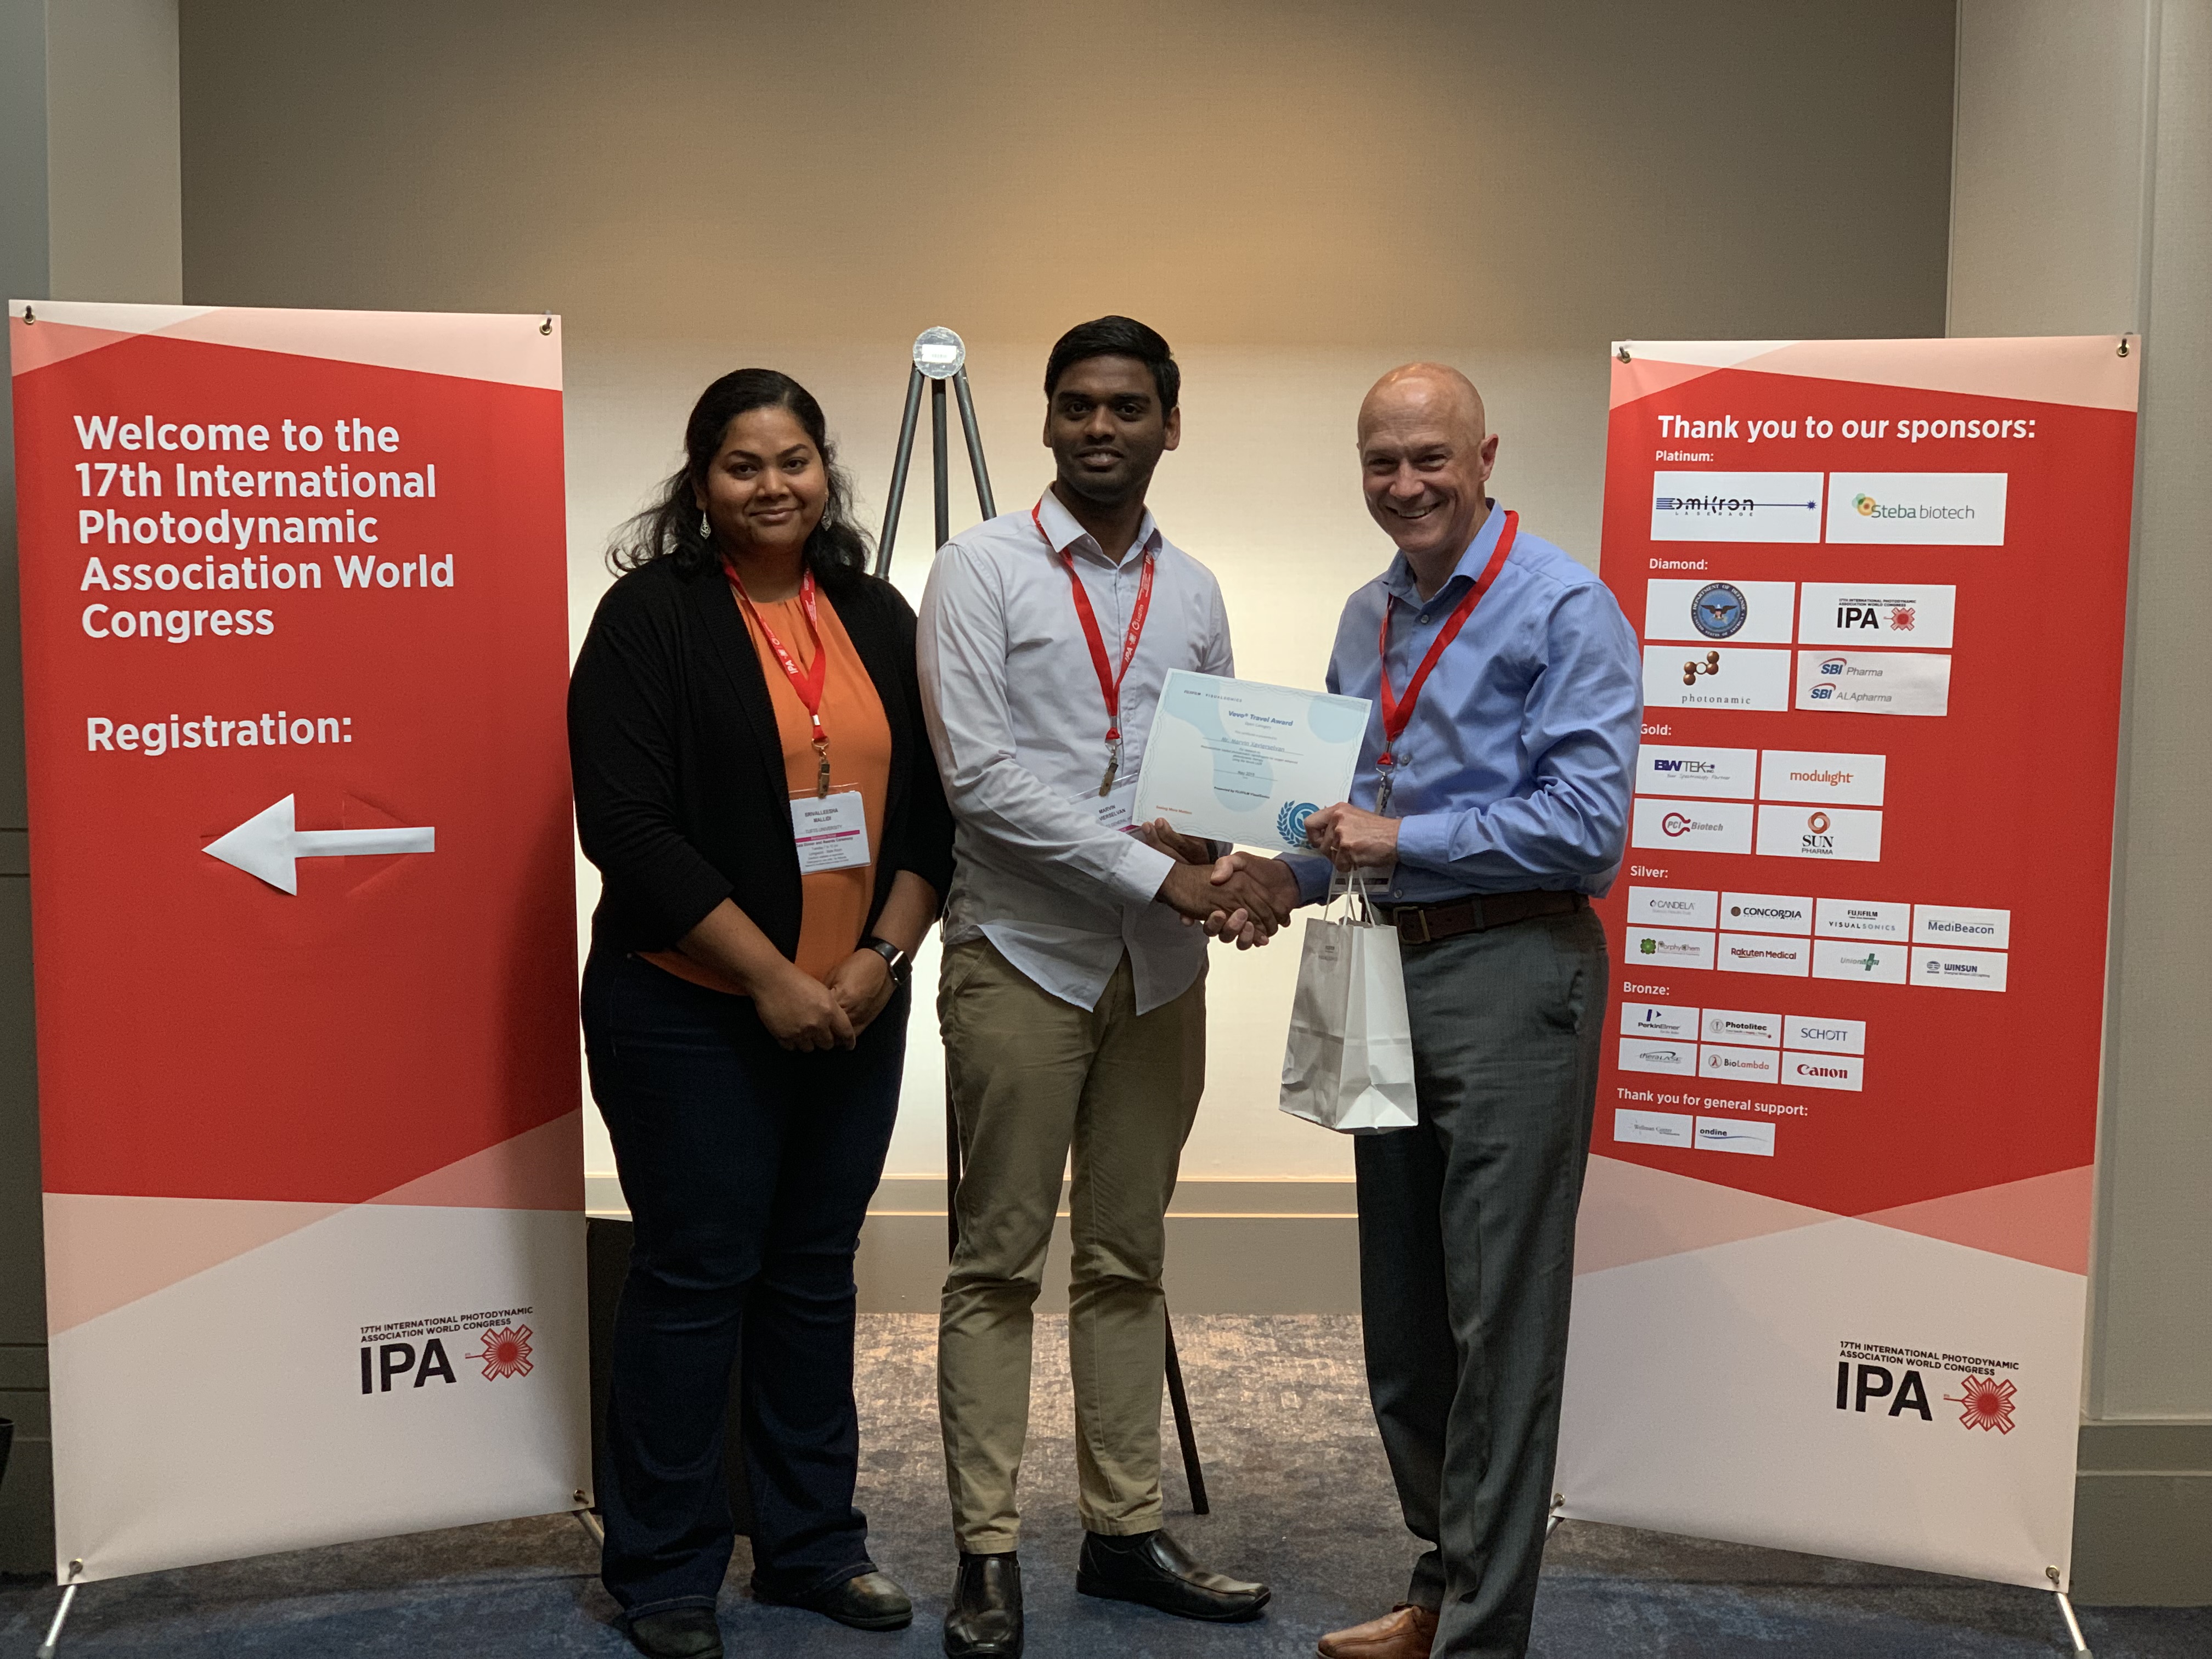 Graduate student Marvin Xavierselvan wins the Travel Award from VisualSonics Inc and the Prestige People’s Choice Award at the IPA conference in Boston